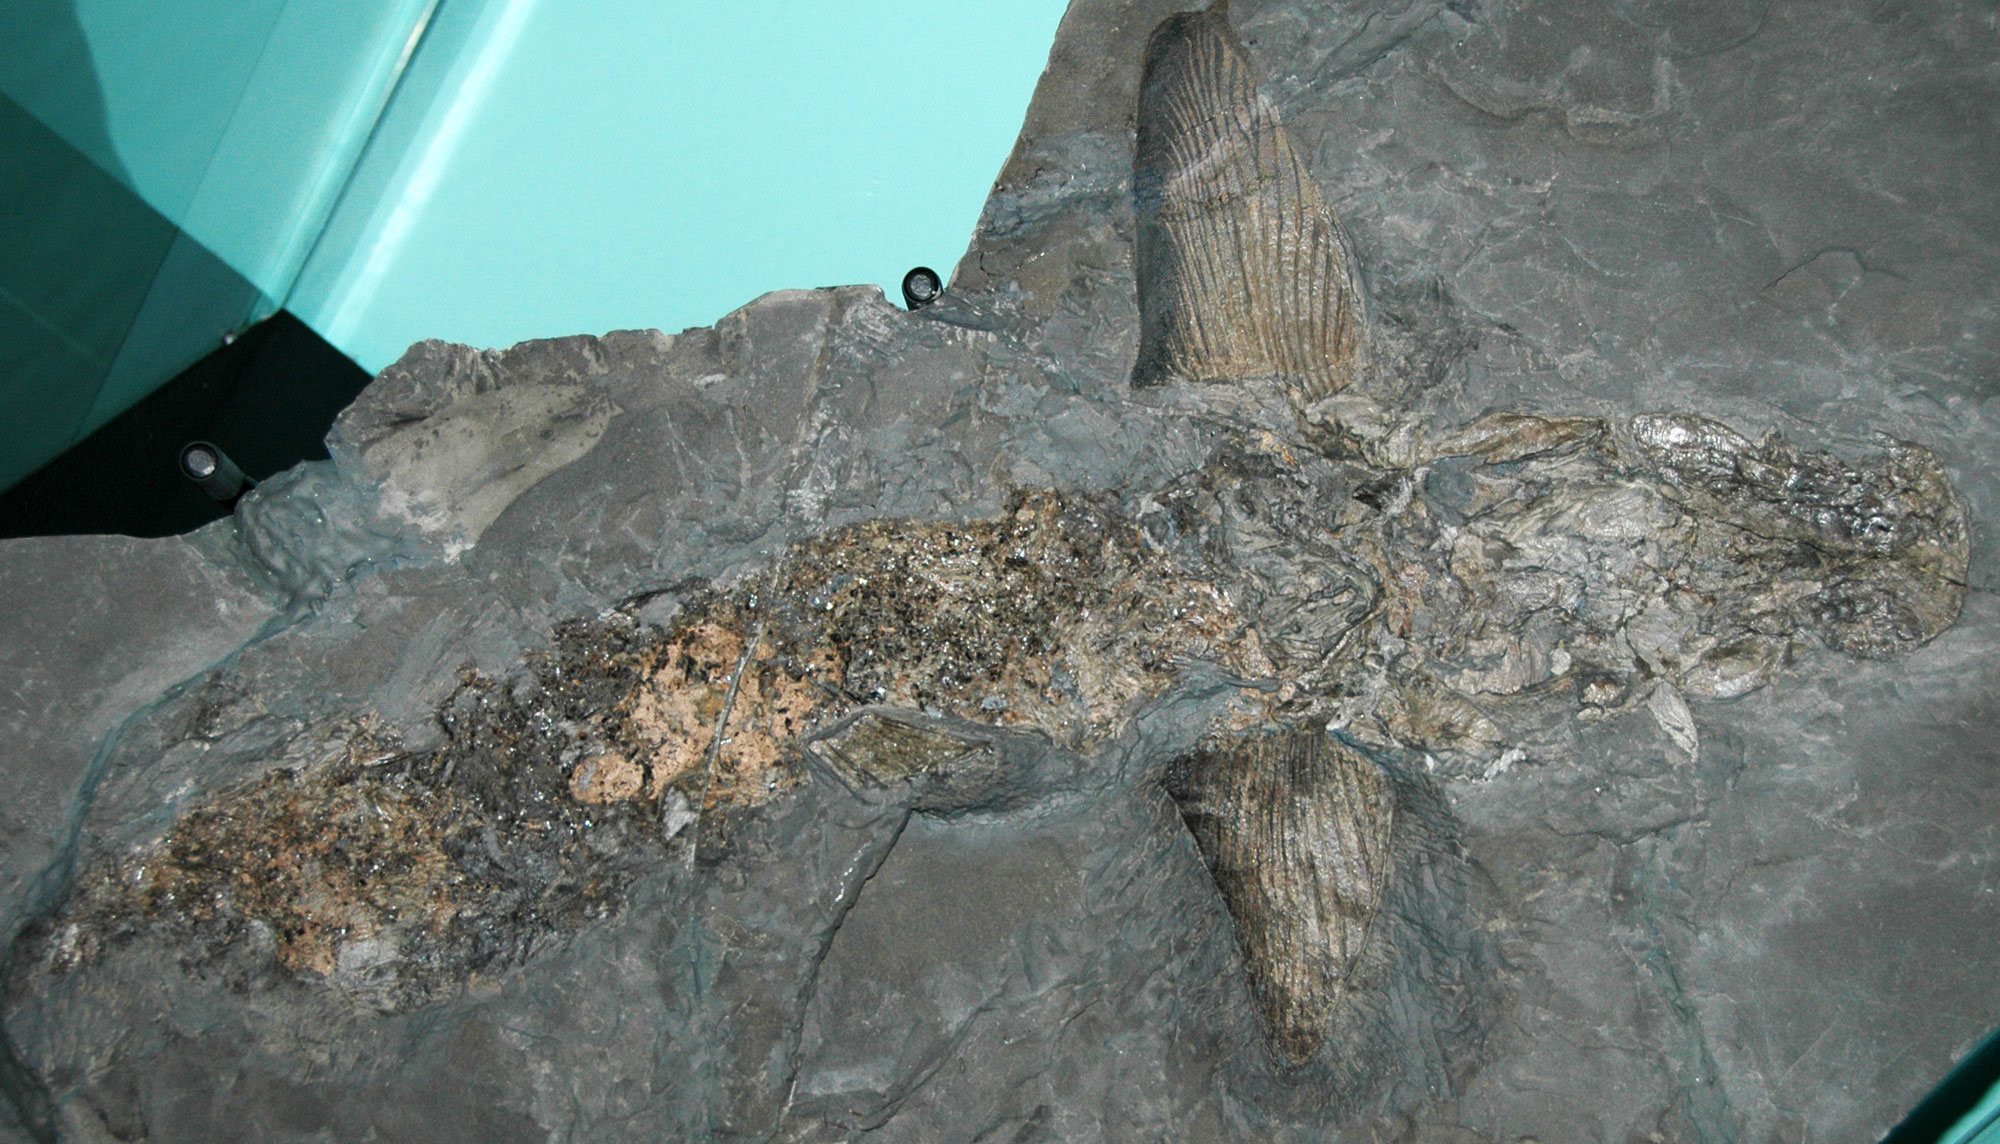 Photograph of the Devonian shark Cladoselache from Ohio. The shark is preserved on the surface of a gray rock, with the viewer looking at its back (dorsal side). The photo shows an elongated animal with two large pectoral fins behind its head. The tail is not preserved.